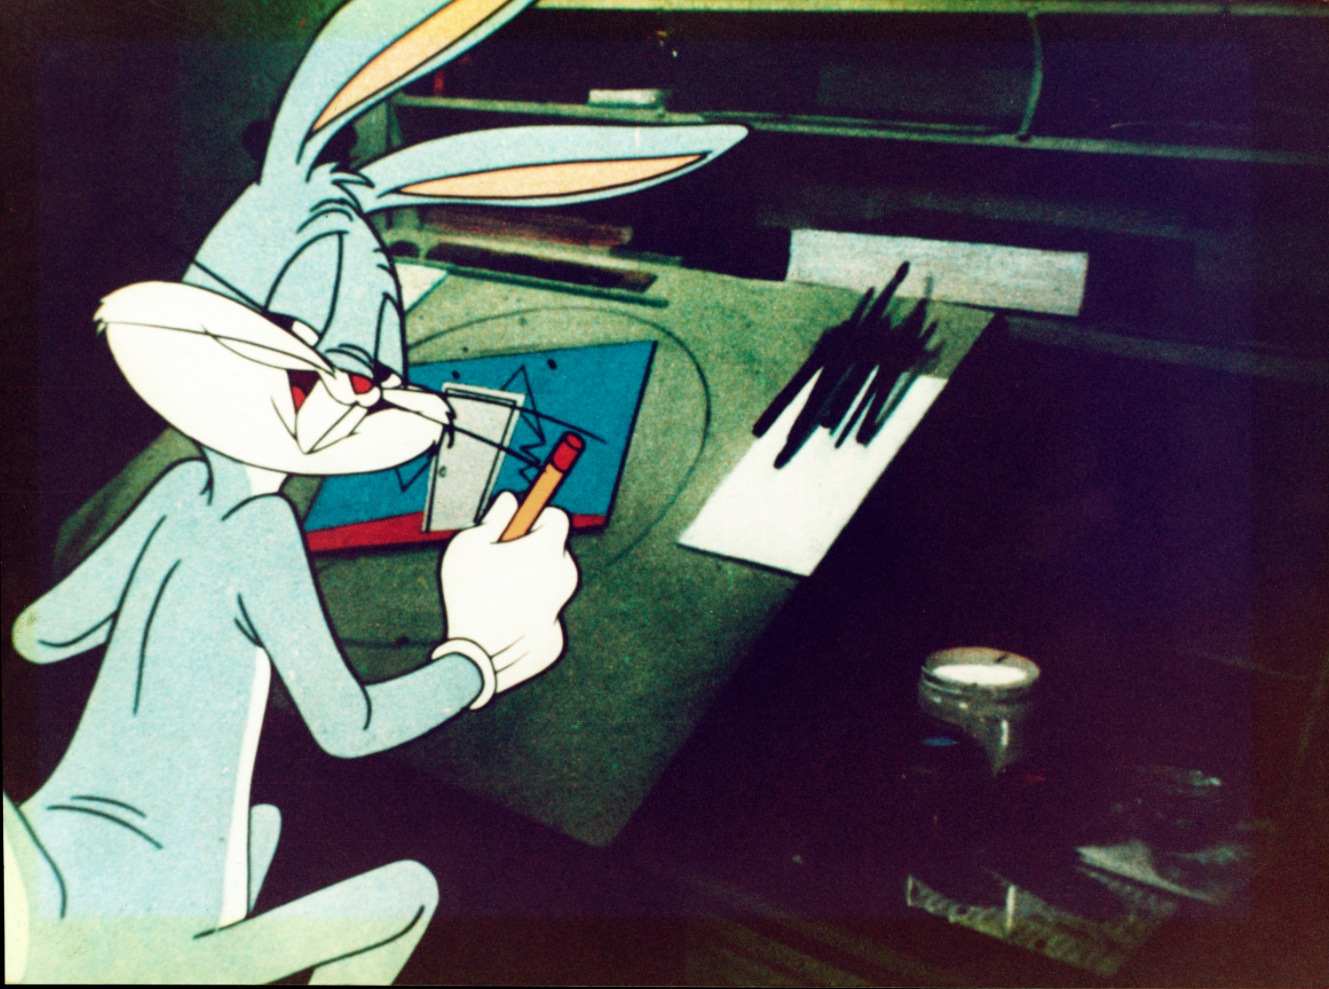 From Bugs Bunny To Wile E. Coyote: The Animation Genius Of Chuck Jones